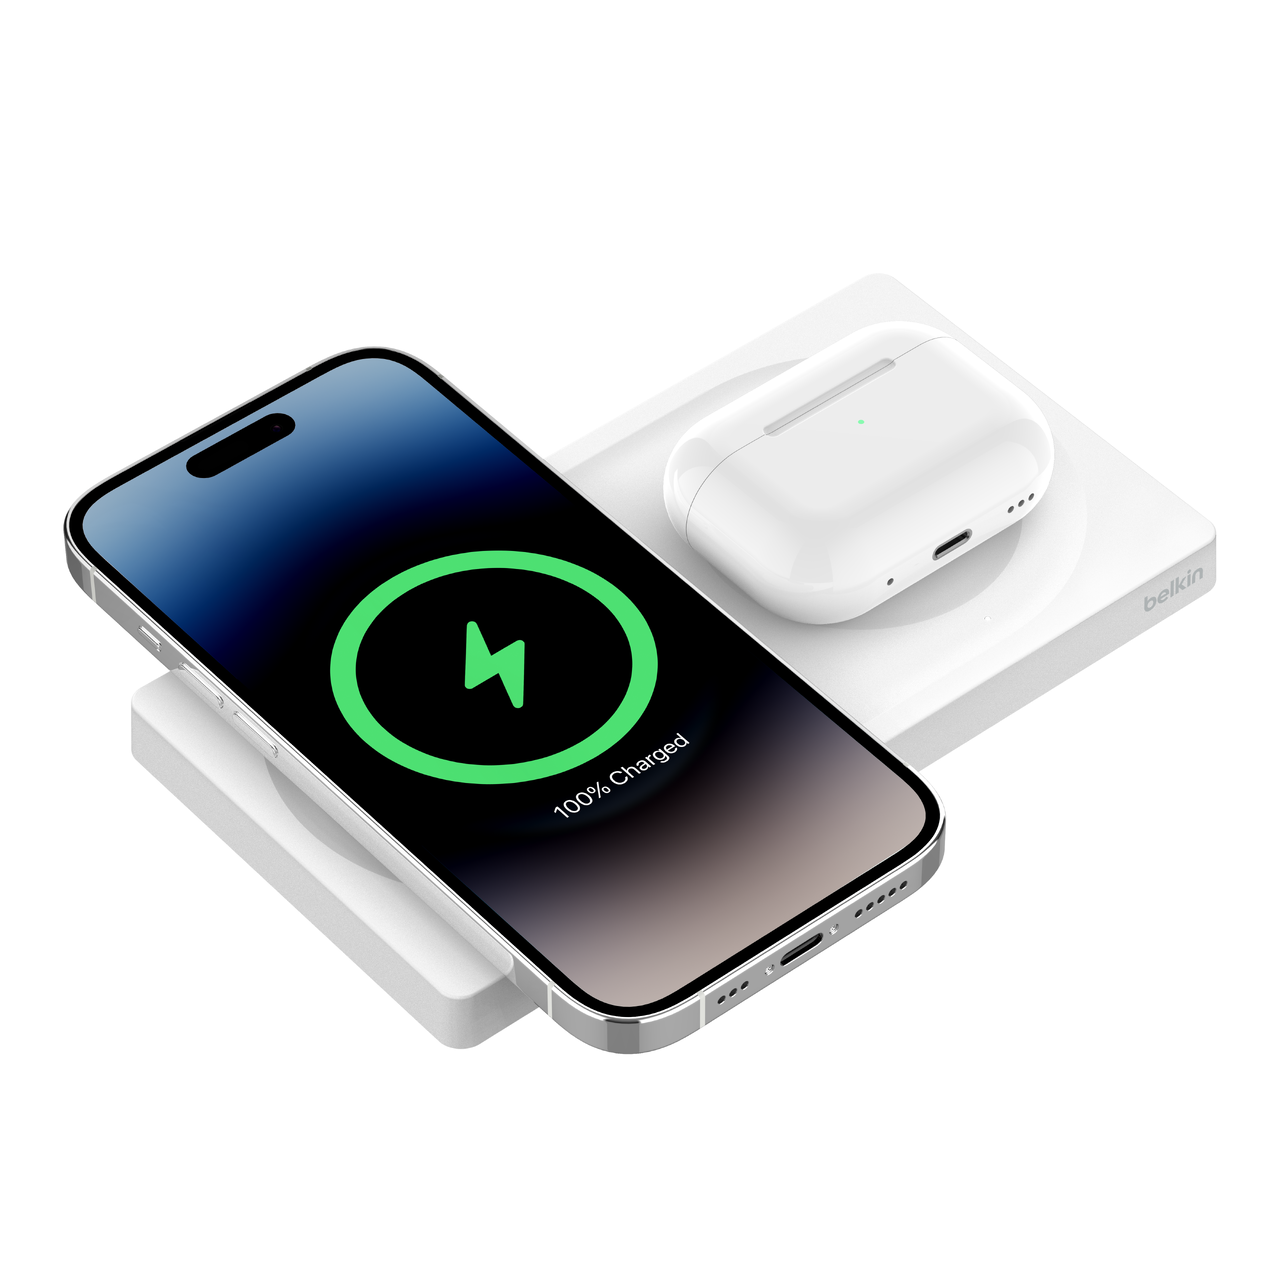 Buy Belkin Boost Charge 3in1 Qi Charger (WIZ001VFBK)